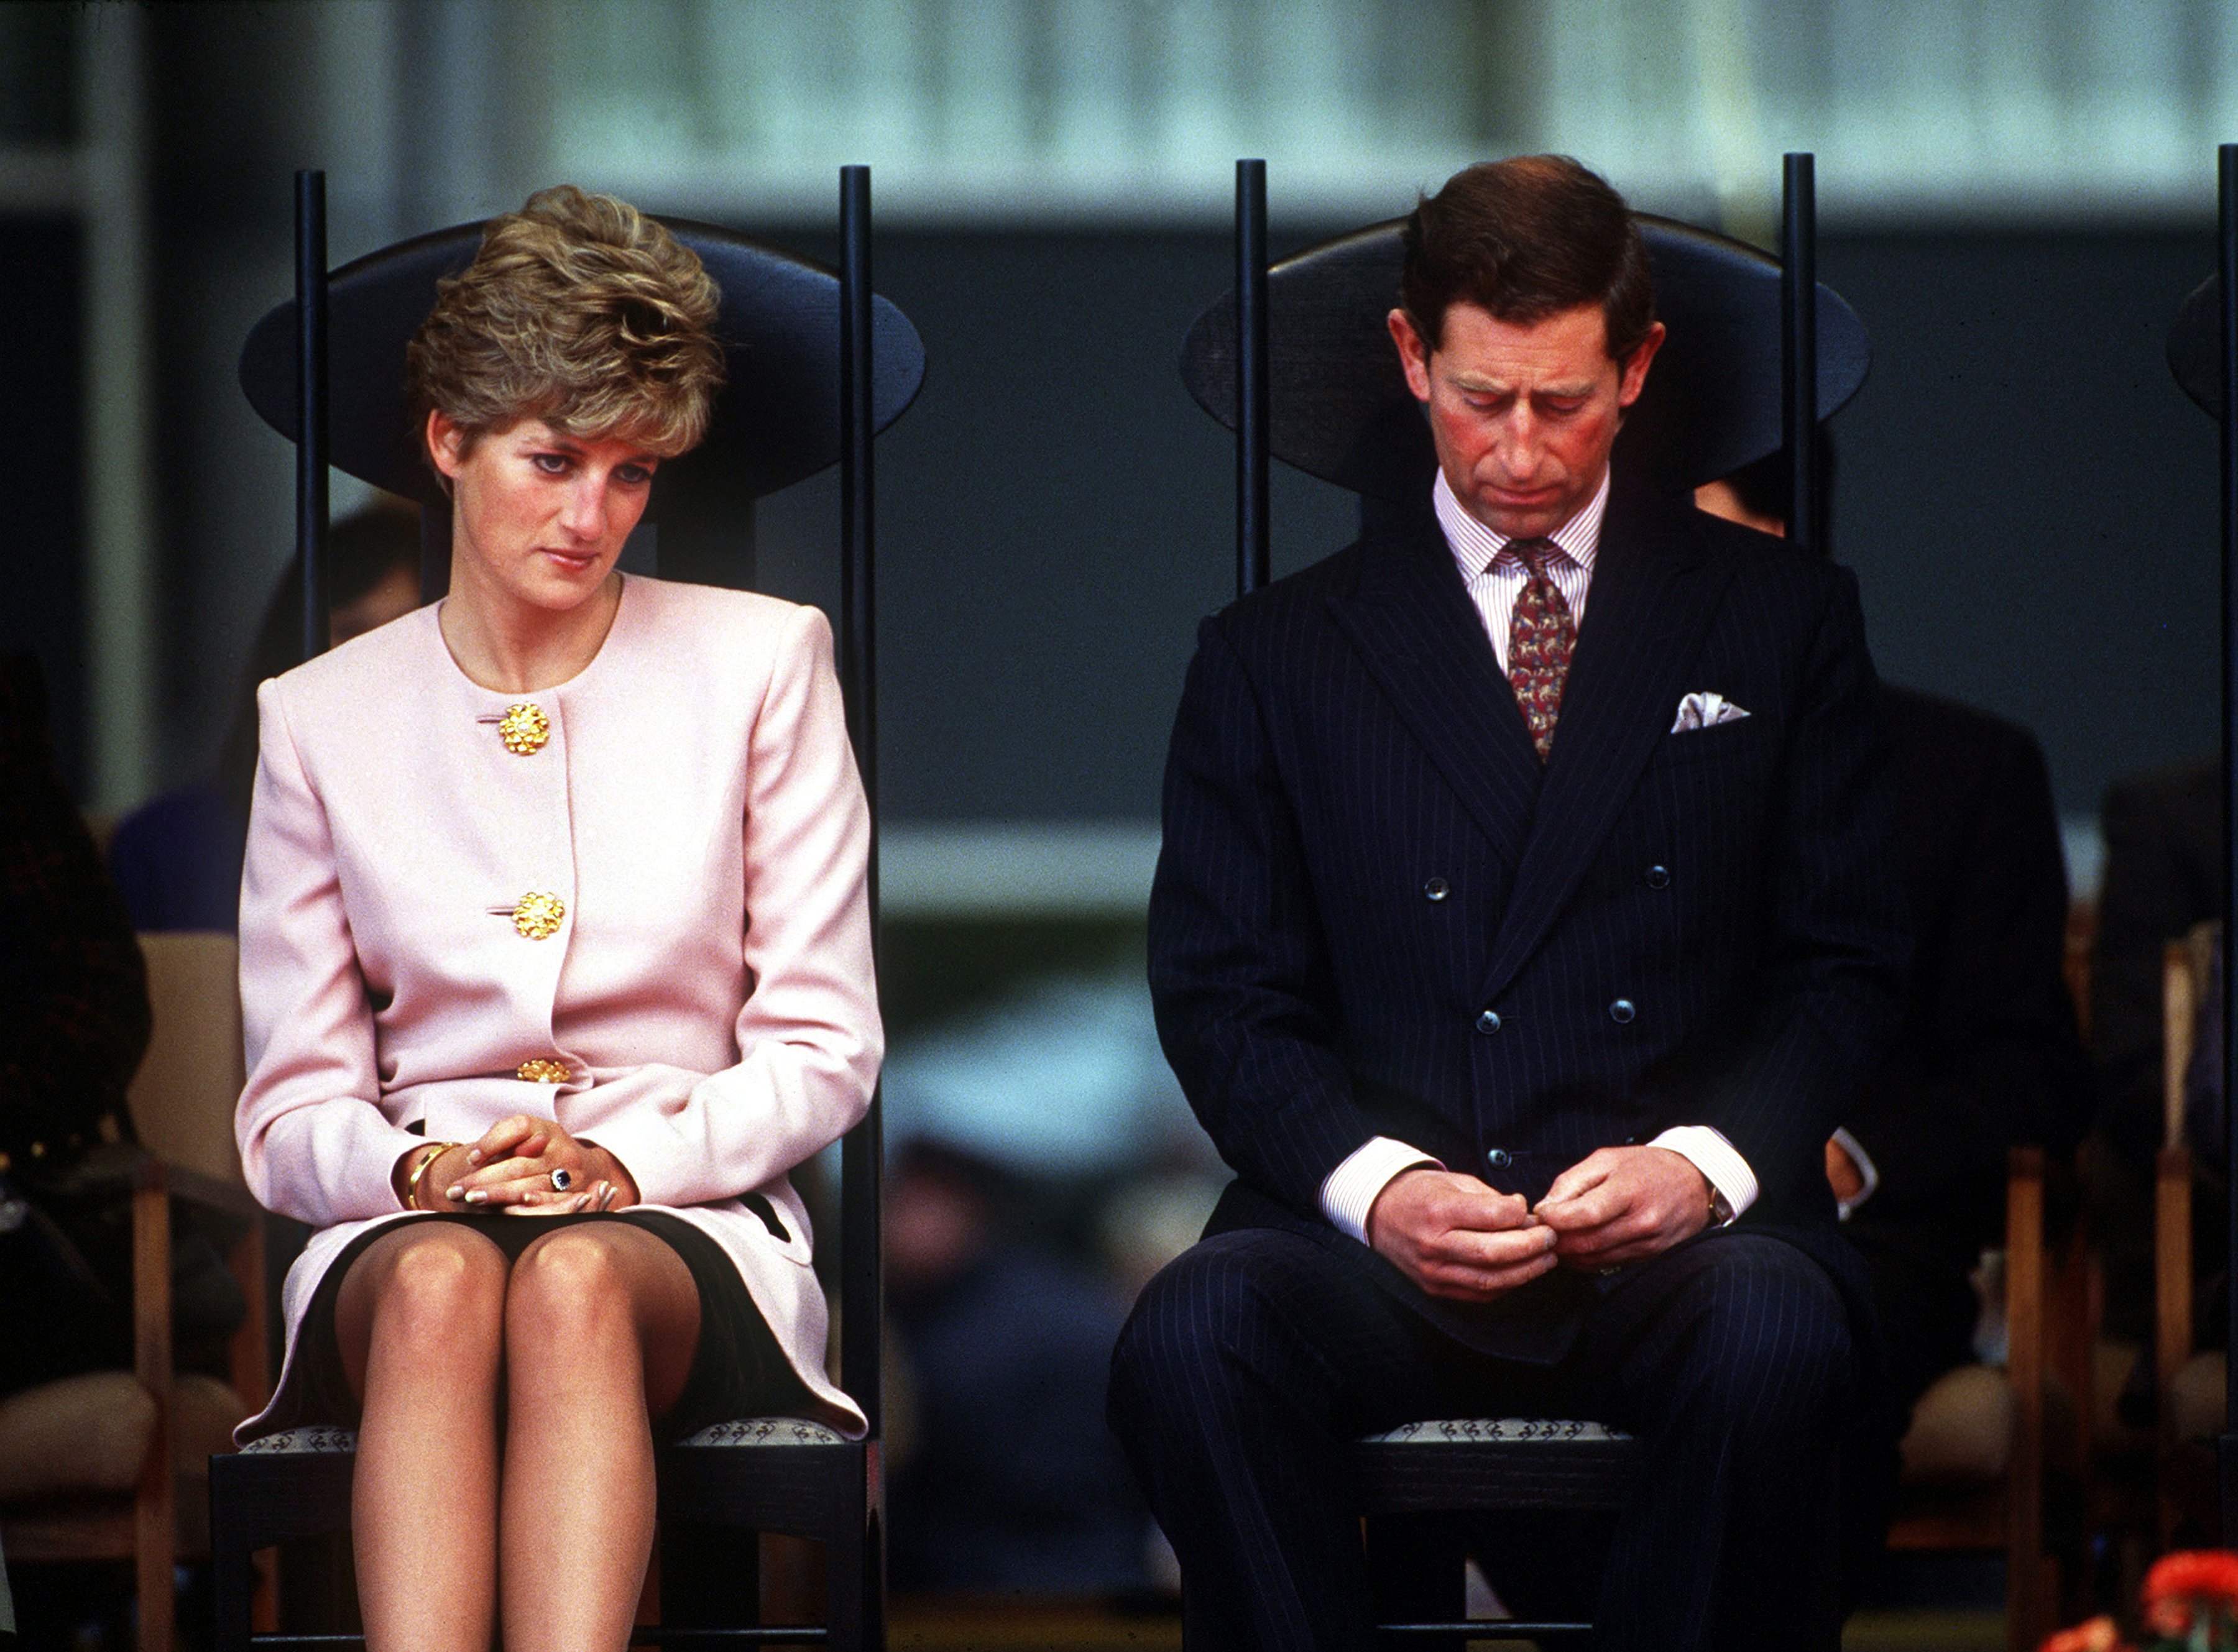 The Prince and Princess of Wales at a welcome ceremony in Toronto at the beginning of their Canadian tour in October 1991. | Source: Getty Images